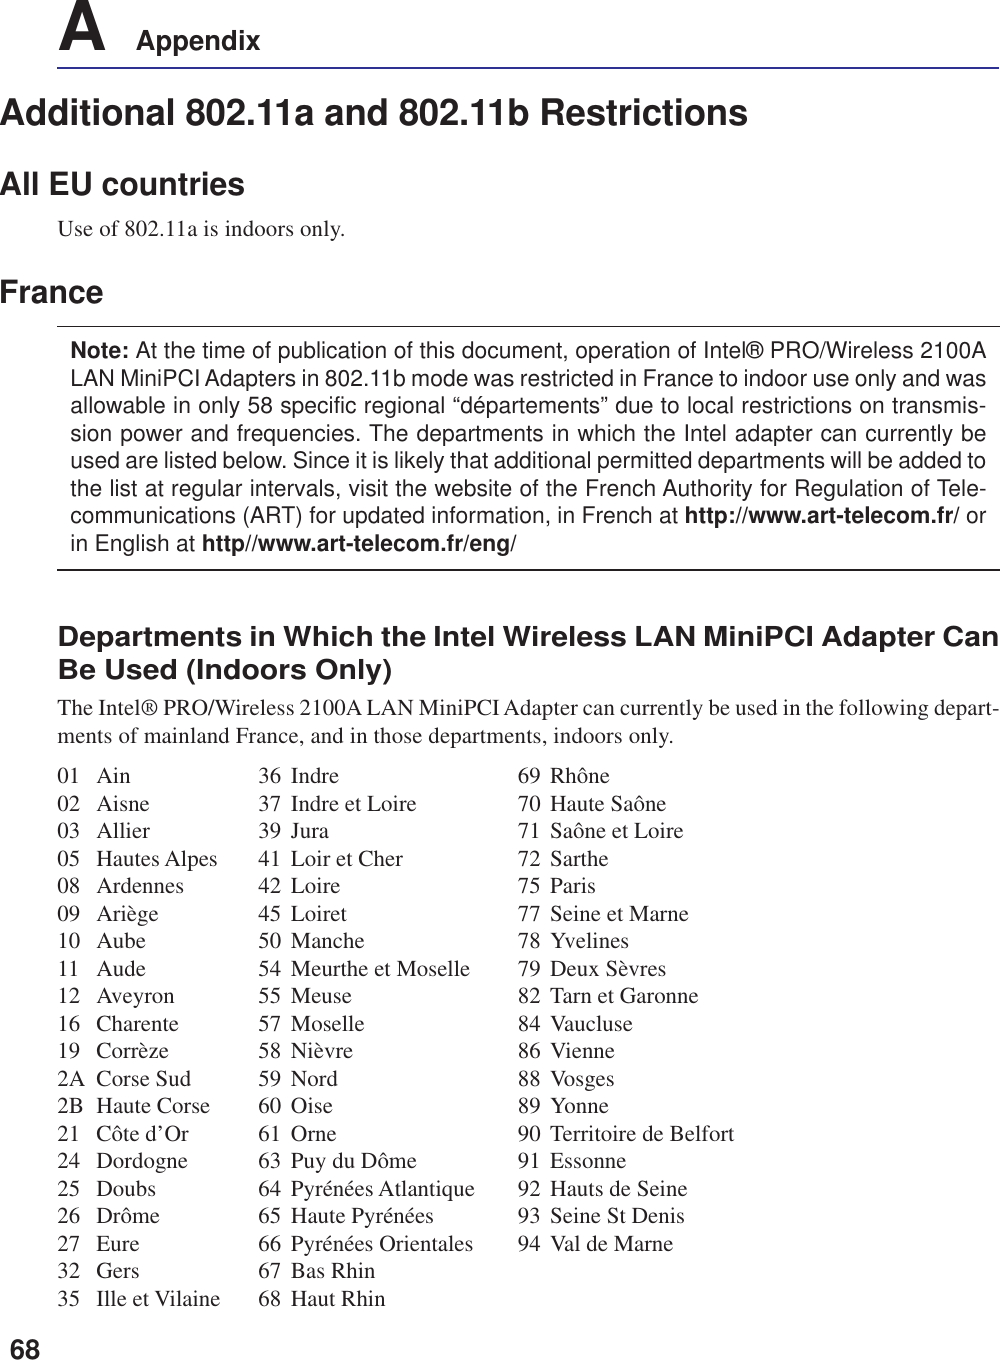 68A    AppendixAdditional 802.11a and 802.11b RestrictionsAll EU countriesUse of 802.11a is indoors only.FranceNote: At the time of publication of this document, operation of Intel® PRO/Wireless 2100ALAN MiniPCI Adapters in 802.11b mode was restricted in France to indoor use only and wasallowable in only 58 specific regional “départements” due to local restrictions on transmis-sion power and frequencies. The departments in which the Intel adapter can currently beused are listed below. Since it is likely that additional permitted departments will be added tothe list at regular intervals, visit the website of the French Authority for Regulation of Tele-communications (ART) for updated information, in French at http://www.art-telecom.fr/ orin English at http//www.art-telecom.fr/eng/Departments in Which the Intel Wireless LAN MiniPCI Adapter CanBe Used (Indoors Only)The Intel® PRO/Wireless 2100A LAN MiniPCI Adapter can currently be used in the following depart-ments of mainland France, and in those departments, indoors only.01 Ain 36 Indre 69 Rhône02 Aisne 37 Indre et Loire 70 Haute Saône03 Allier 39 Jura 71 Saône et Loire05 Hautes Alpes 41 Loir et Cher 72 Sarthe08 Ardennes 42 Loire 75 Paris09 Ariège 45 Loiret 77 Seine et Marne10 Aube 50 Manche 78 Yvelines11 Aude 54 Meurthe et Moselle 79 Deux Sèvres12 Aveyron 55 Meuse 82 Tarn et Garonne16 Charente 57 Moselle 84 Vaucluse19 Corrèze 58 Nièvre 86 Vienne2A Corse Sud 59 Nord 88 Vosges2B Haute Corse 60 Oise 89 Yonne21 Côte d’Or 61 Orne 90 Territoire de Belfort24 Dordogne 63 Puy du Dôme 91 Essonne25 Doubs 64 Pyrénées Atlantique 92 Hauts de Seine26 Drôme 65 Haute Pyrénées 93 Seine St Denis27 Eure 66 Pyrénées Orientales 94 Val de Marne32 Gers 67 Bas Rhin35 Ille et Vilaine 68 Haut Rhin